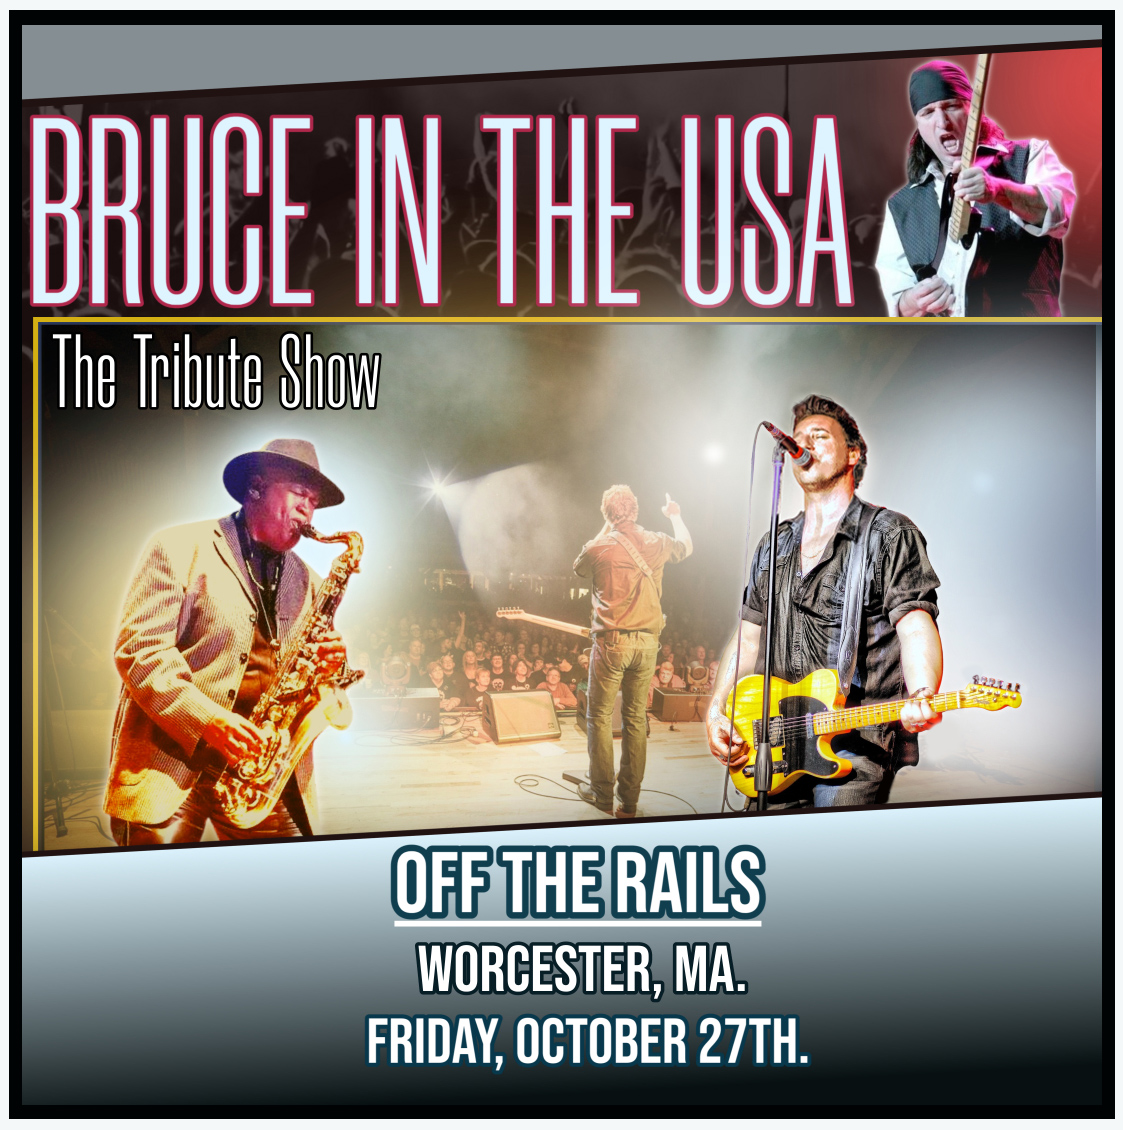 BRUCE IN THE USA - The Bruce Springsteen Tribute Show will be performing at OFF THE RAILS in Worcester, MA. Friday, October 27th. - 8 PM LIVE! Find out more... offtherailsworcester.com